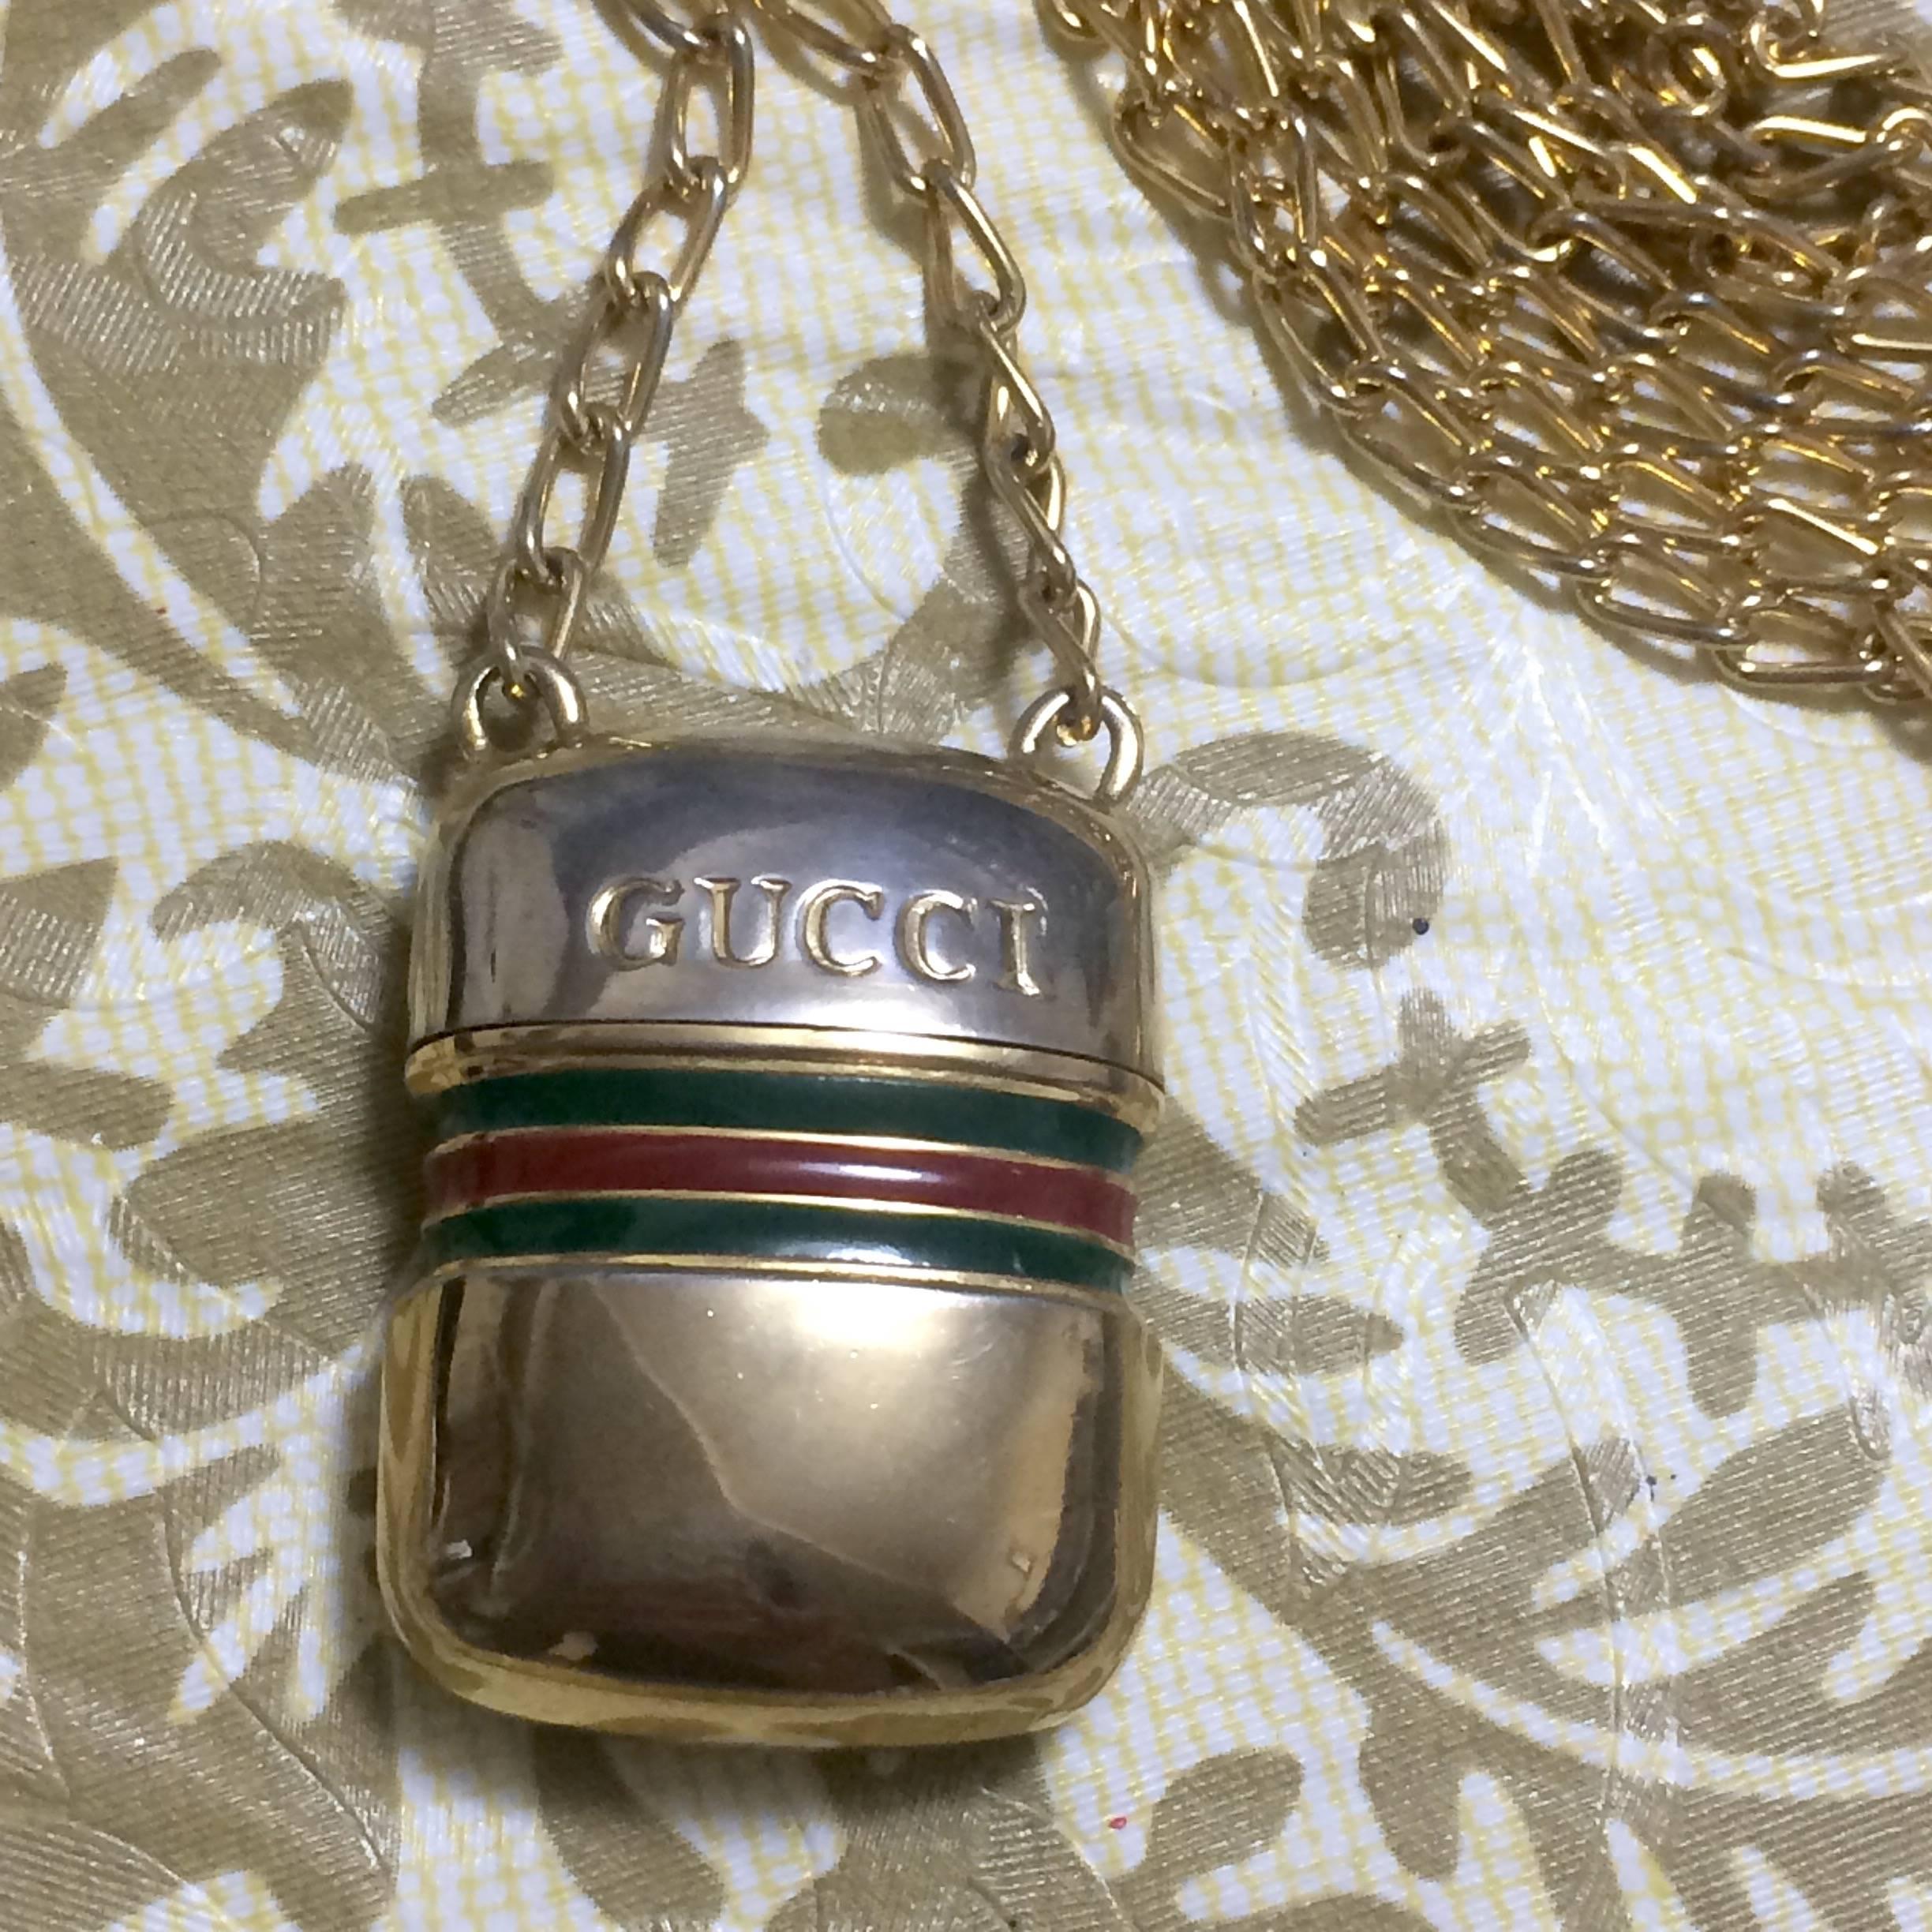 1980s. Vintage Gucci golden mini bottle, pill case design necklace with embossed logo mark and webbing sherry line motif. Gorgeous jewelry piece.

Introducing a rare vintage mini bottle necklace with the iconic green and red webbing sherry line mark